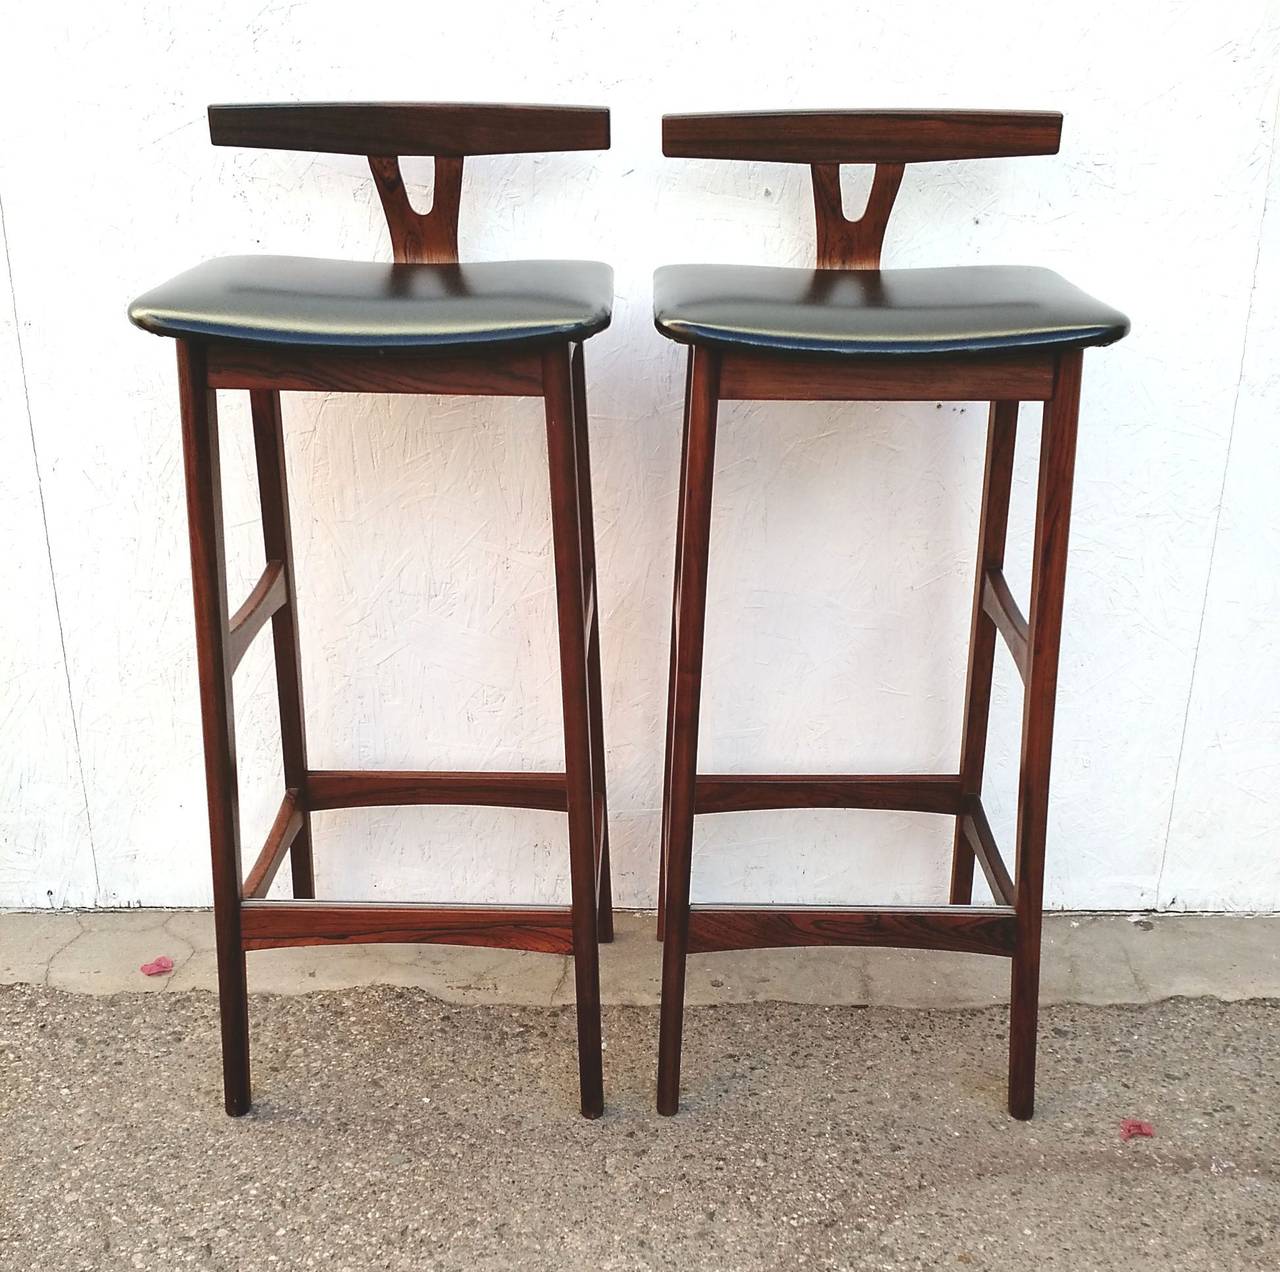 Incredible pair of 1960's bar stools sculpted of gorgeous rosewood. Labeled 